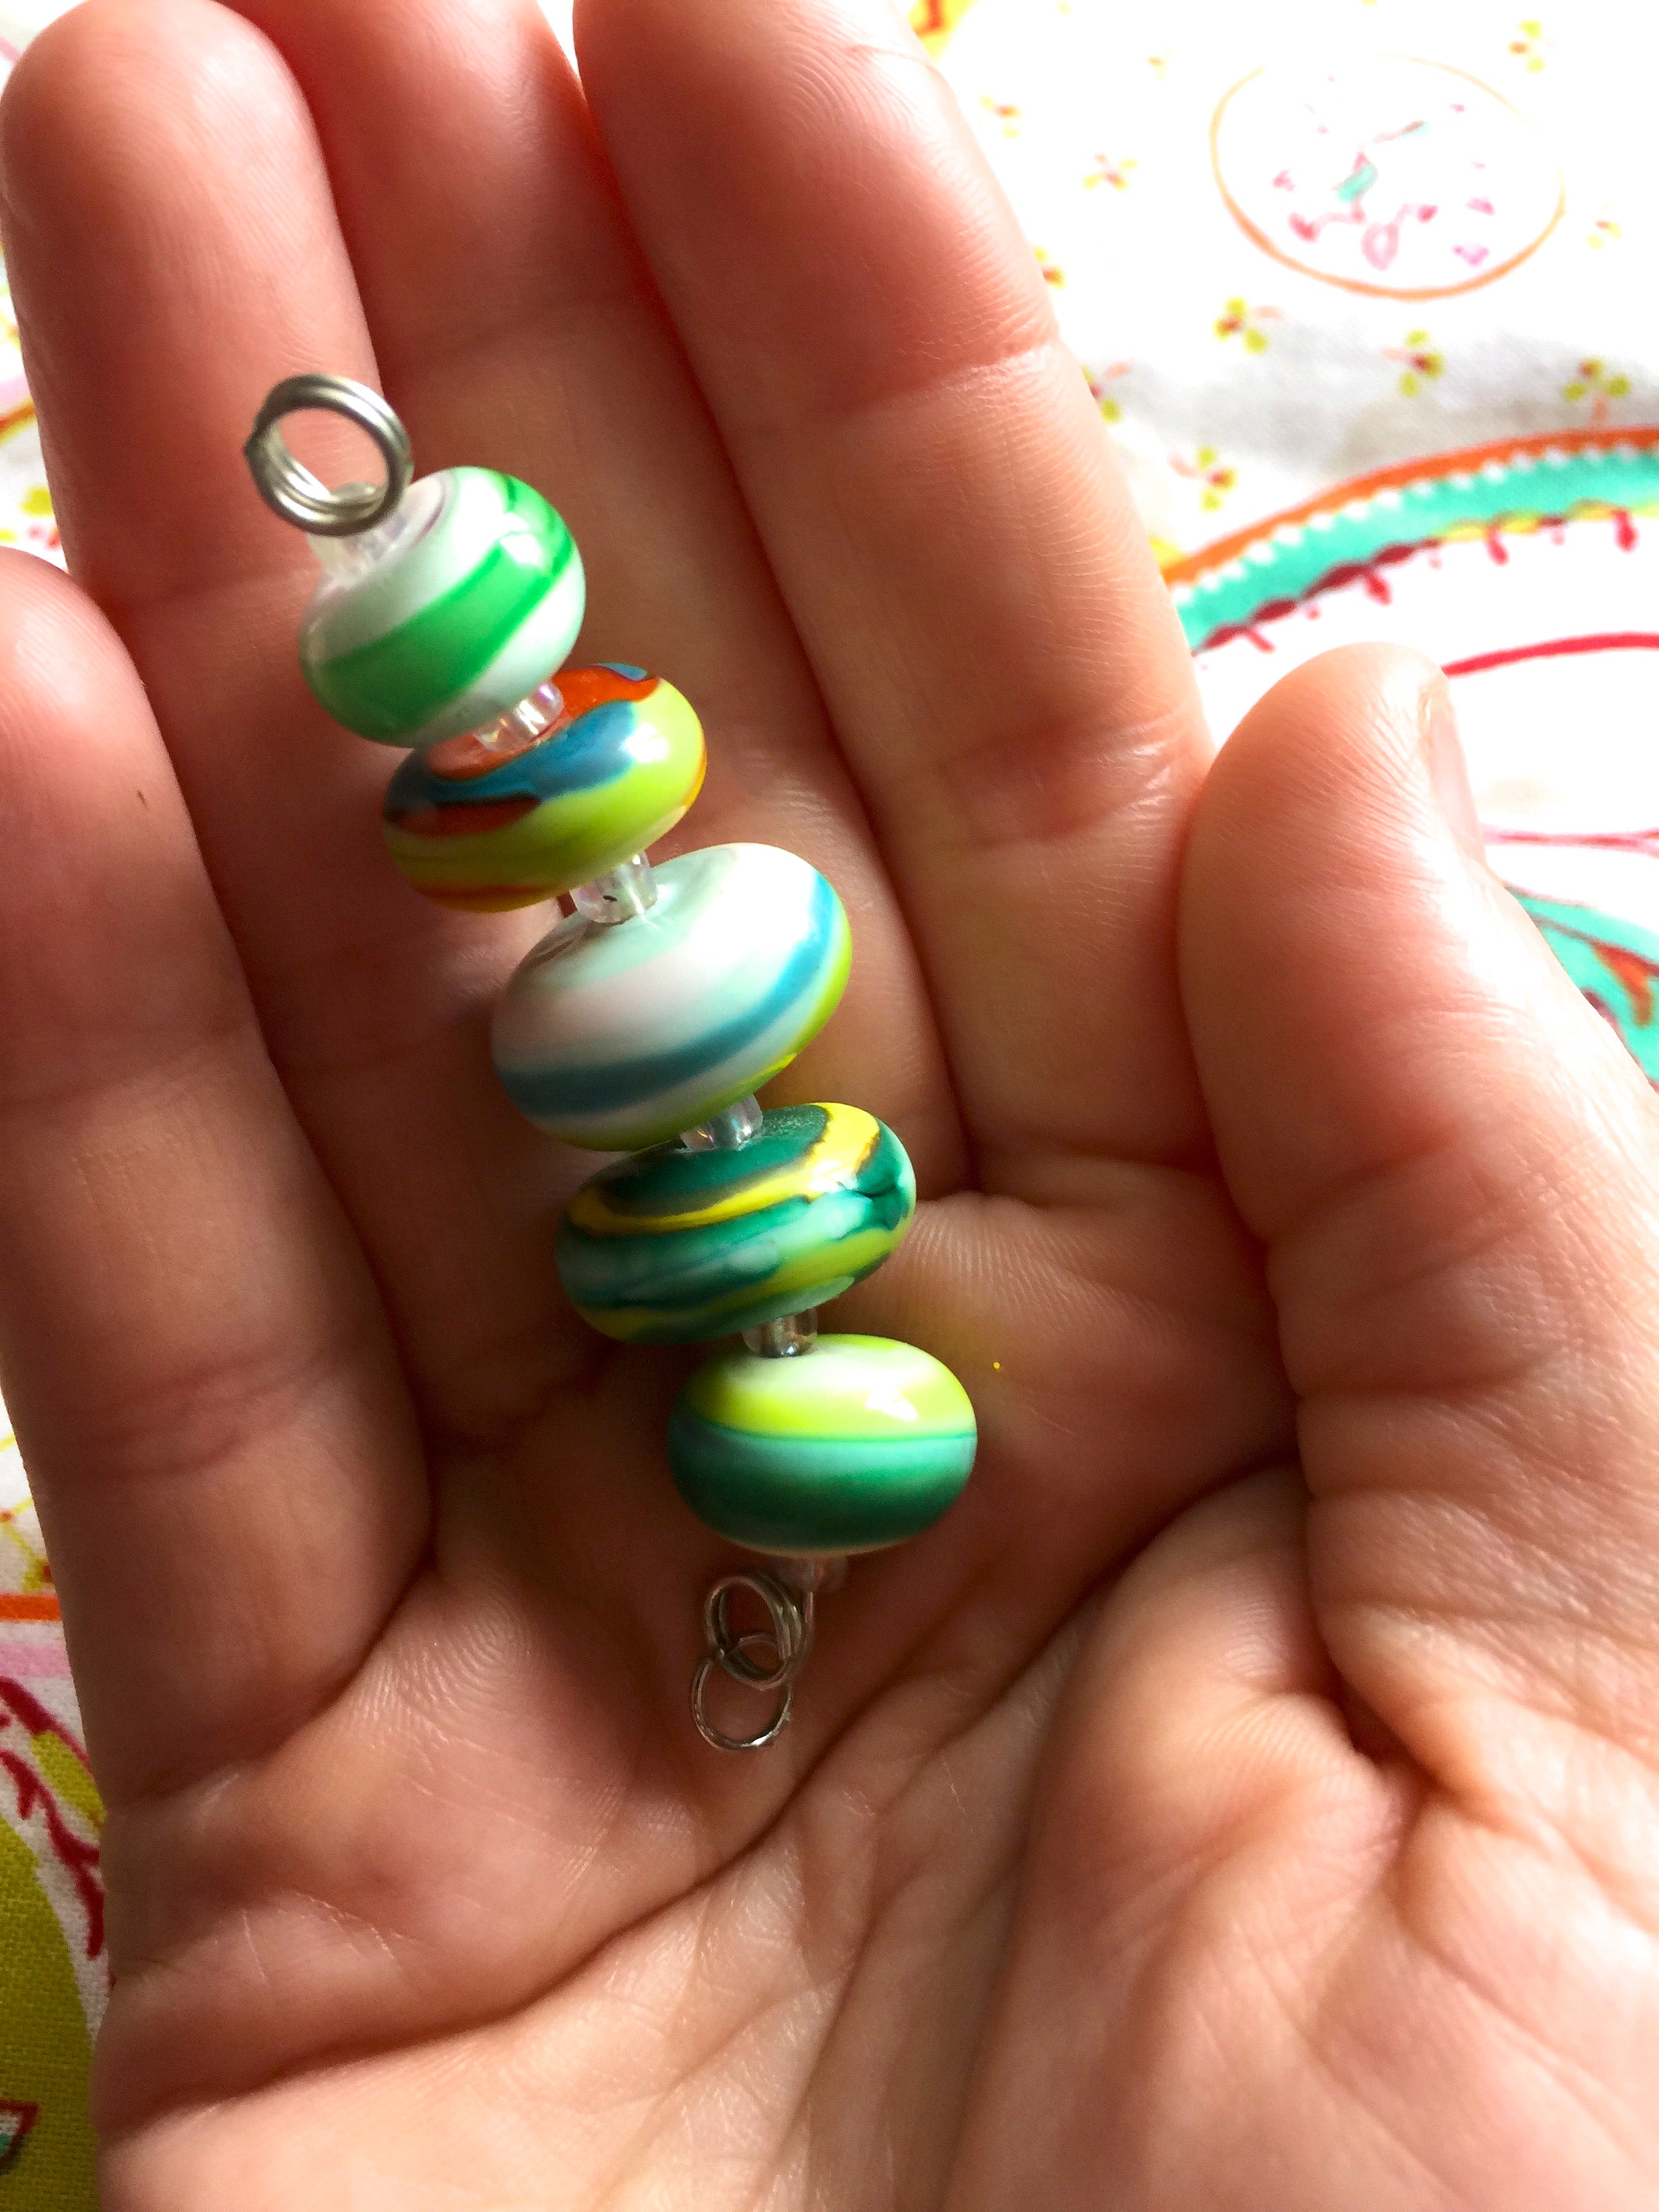 Set of 5 Colorful Handcrafted Lampwork Glass Beads with Bright Swirls and stripes in fun summer colors.